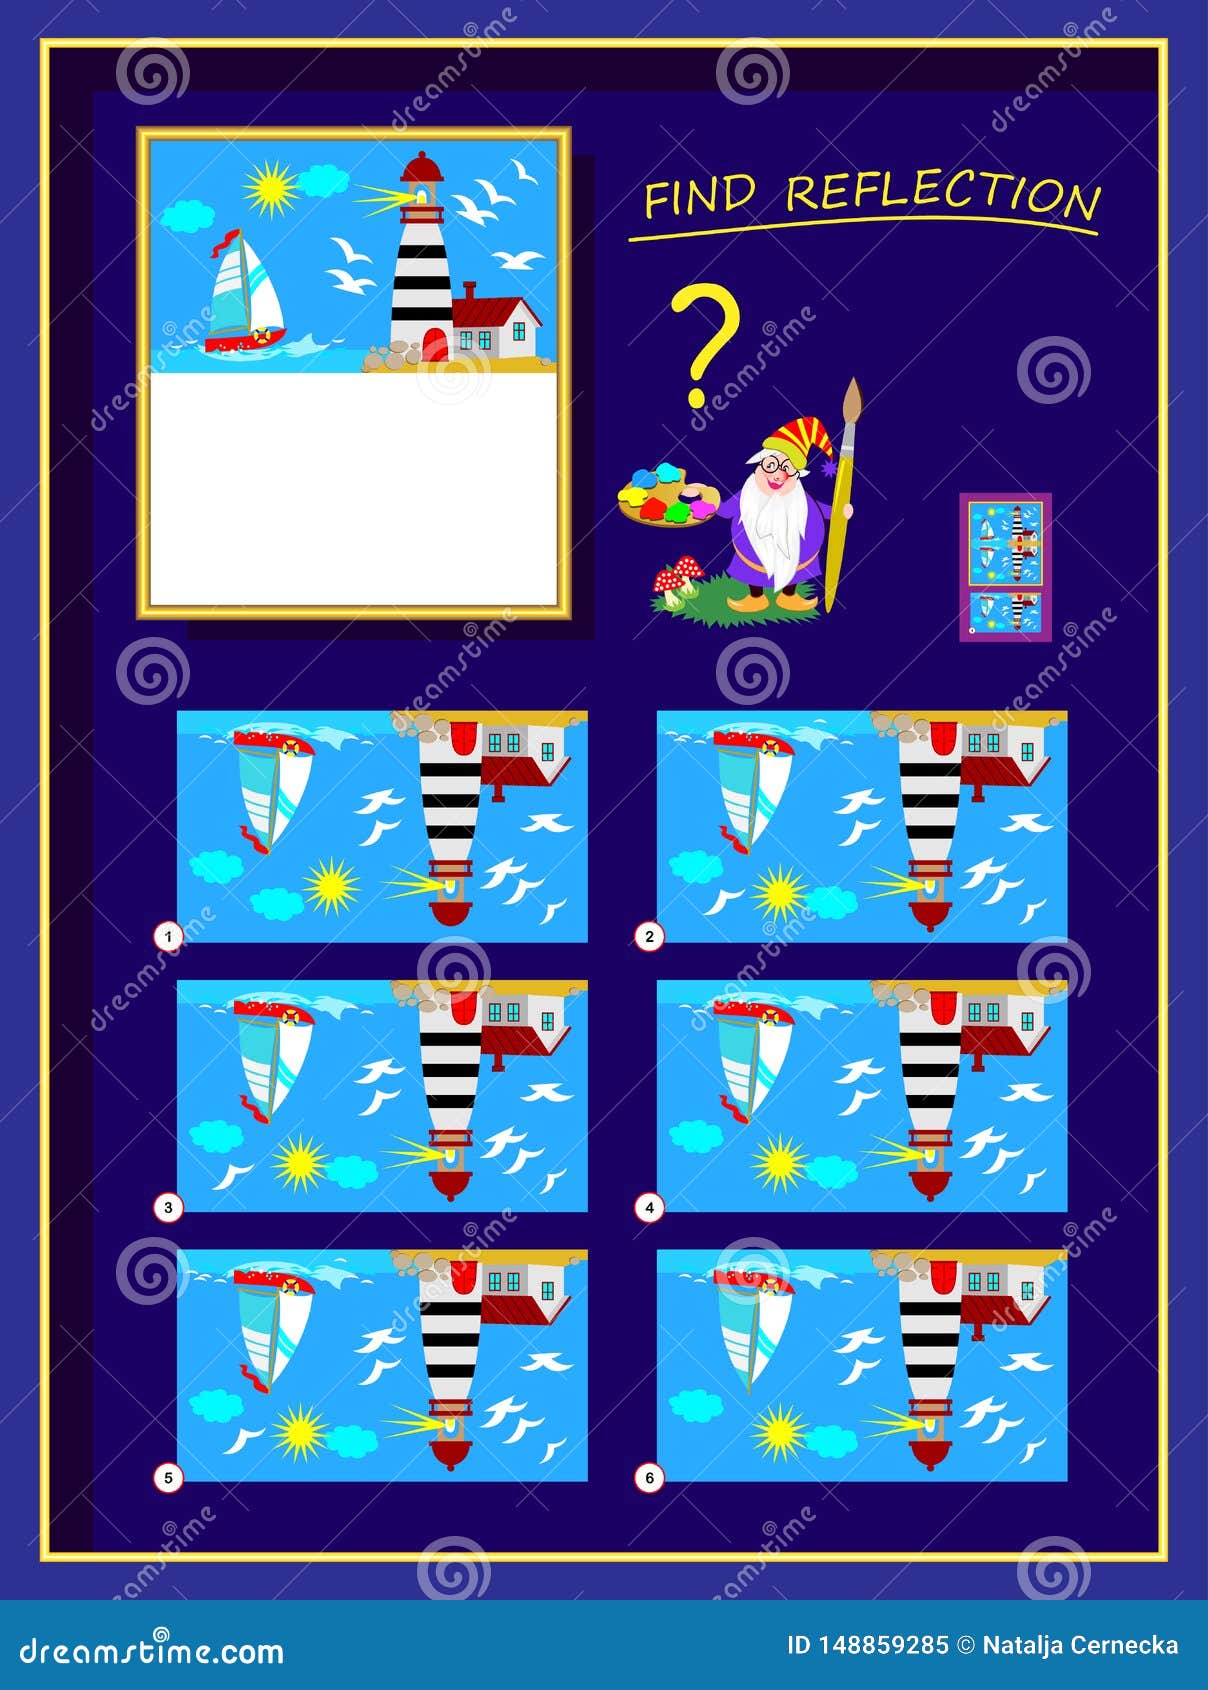 logic puzzle game for smartest. help the artist finish the picture, find correct reflection and draw it.